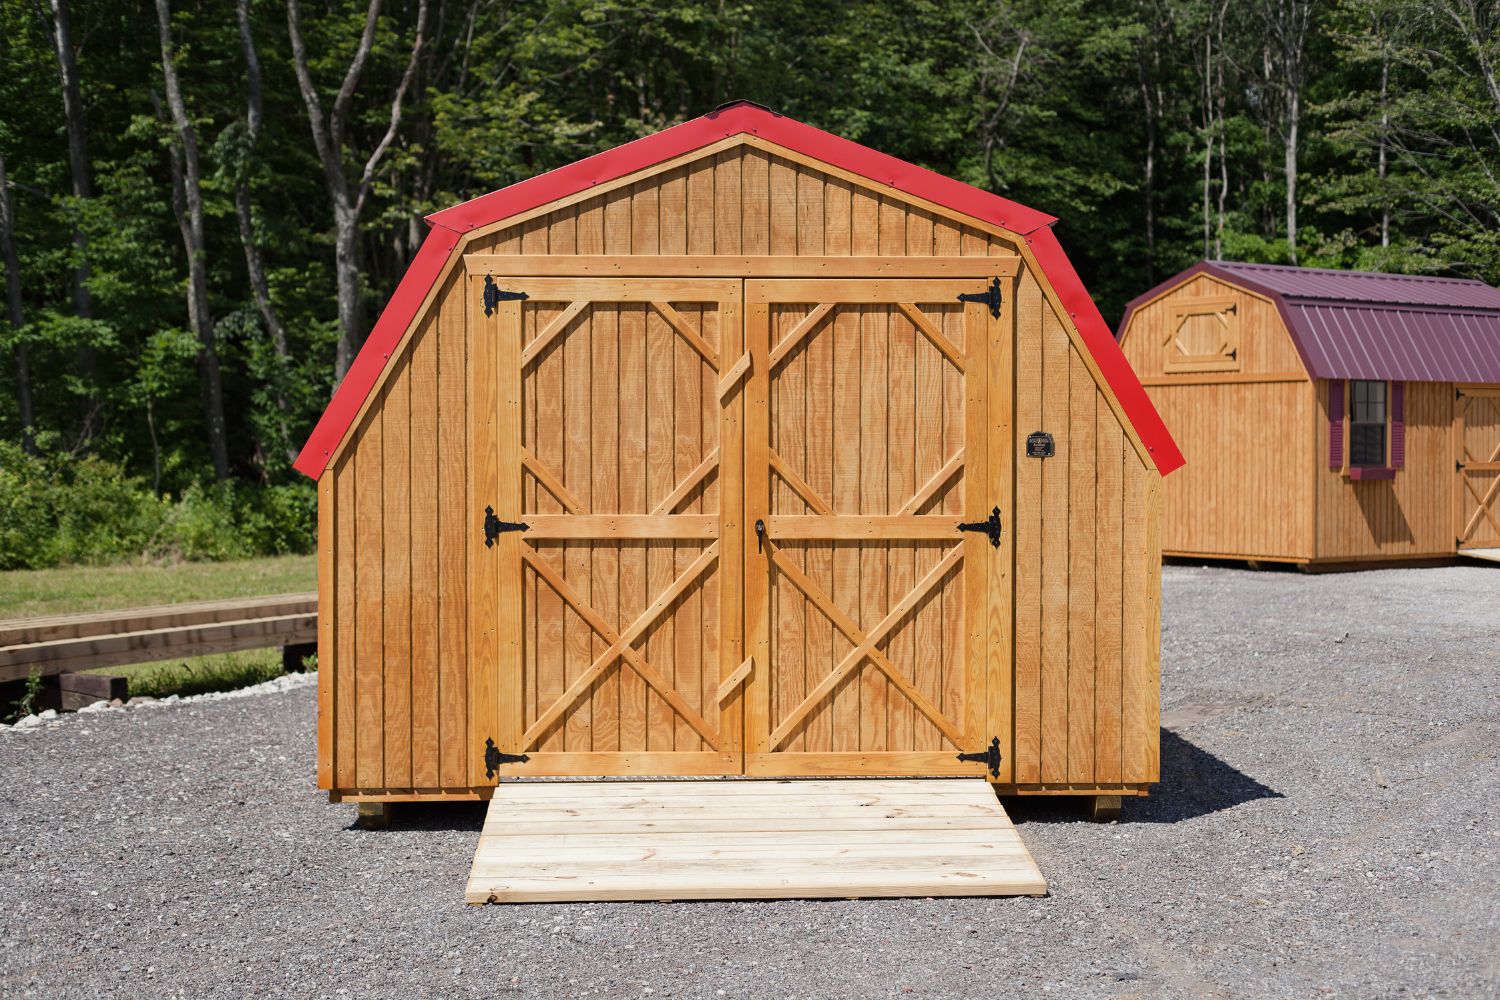 Barn-Style 10x10 Sheds